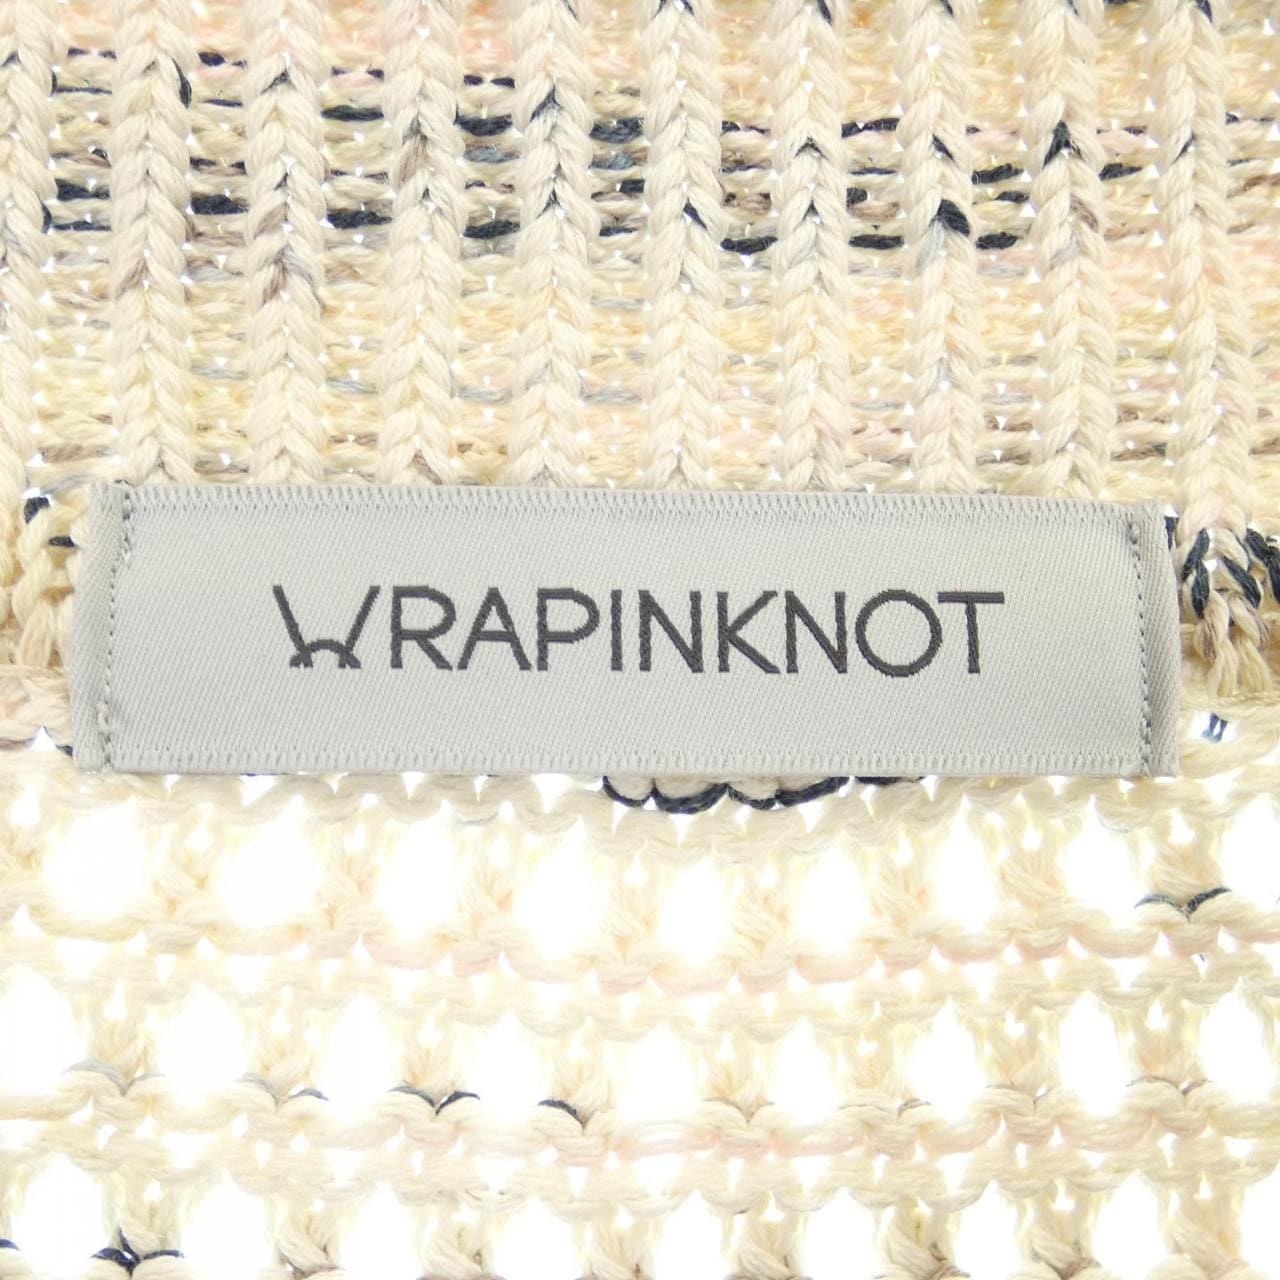 Wrapping knot WRAPINKNOT knit